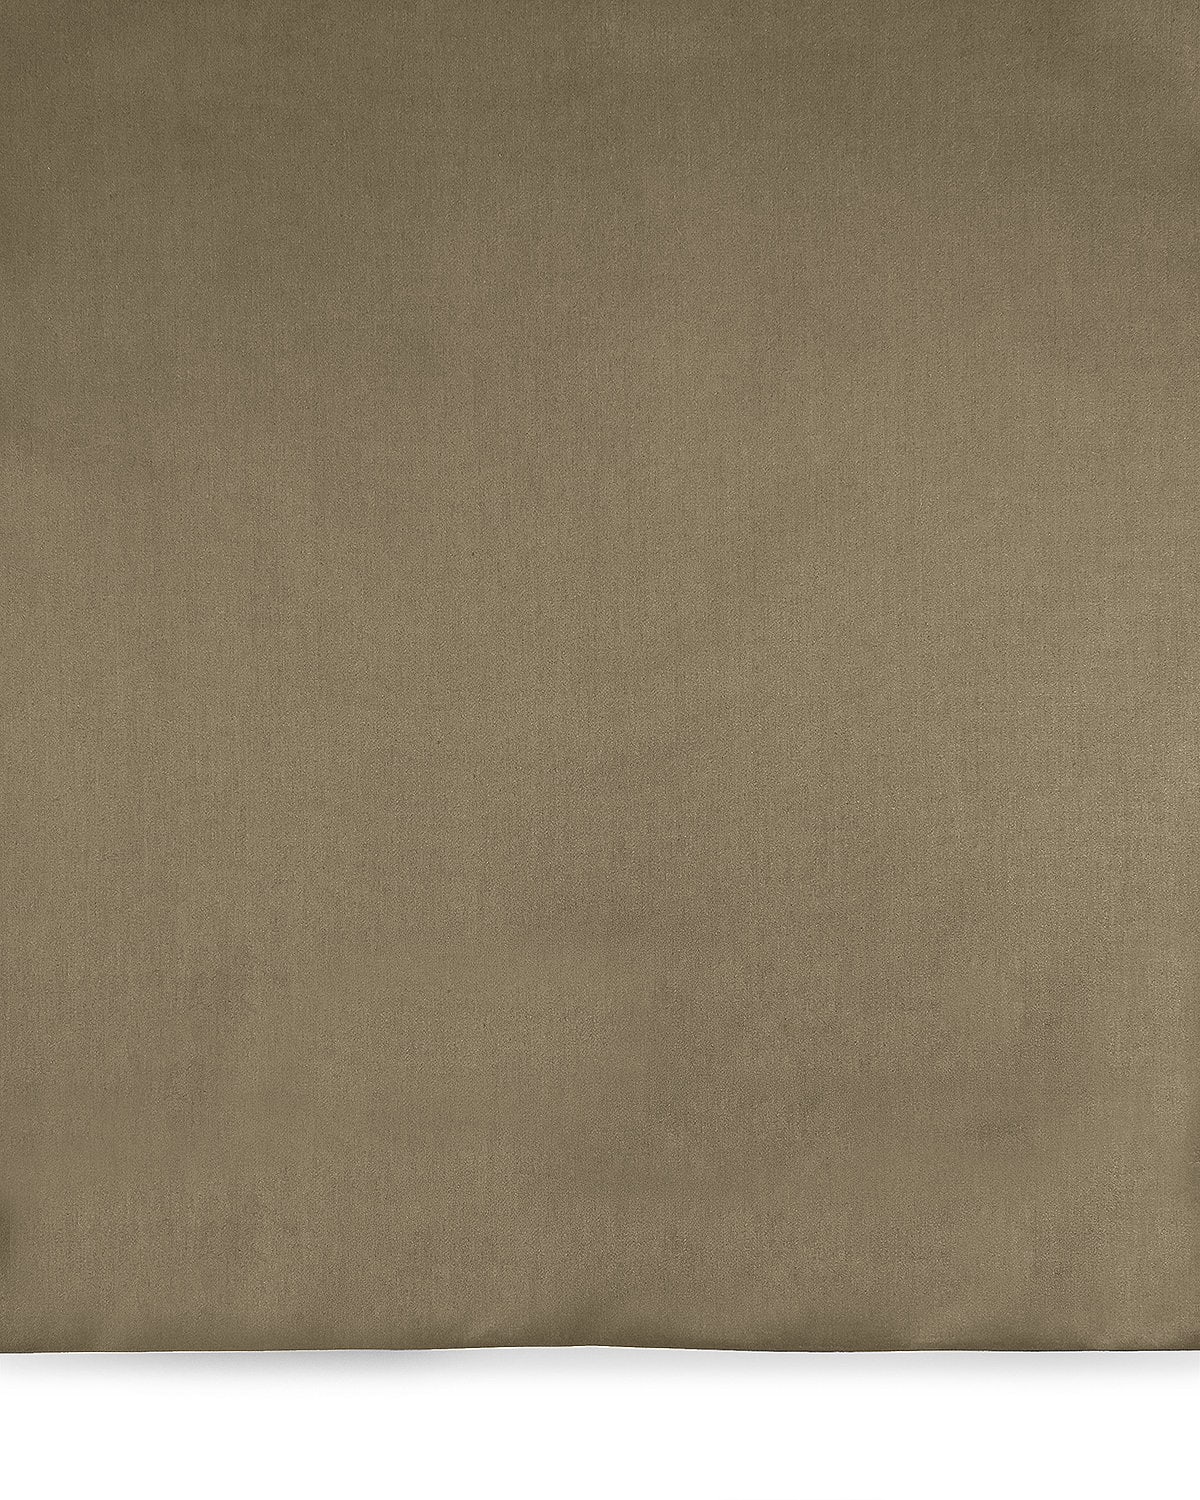 Image Ralph Lauren Home King 624 Thread Count Fitted Sheet